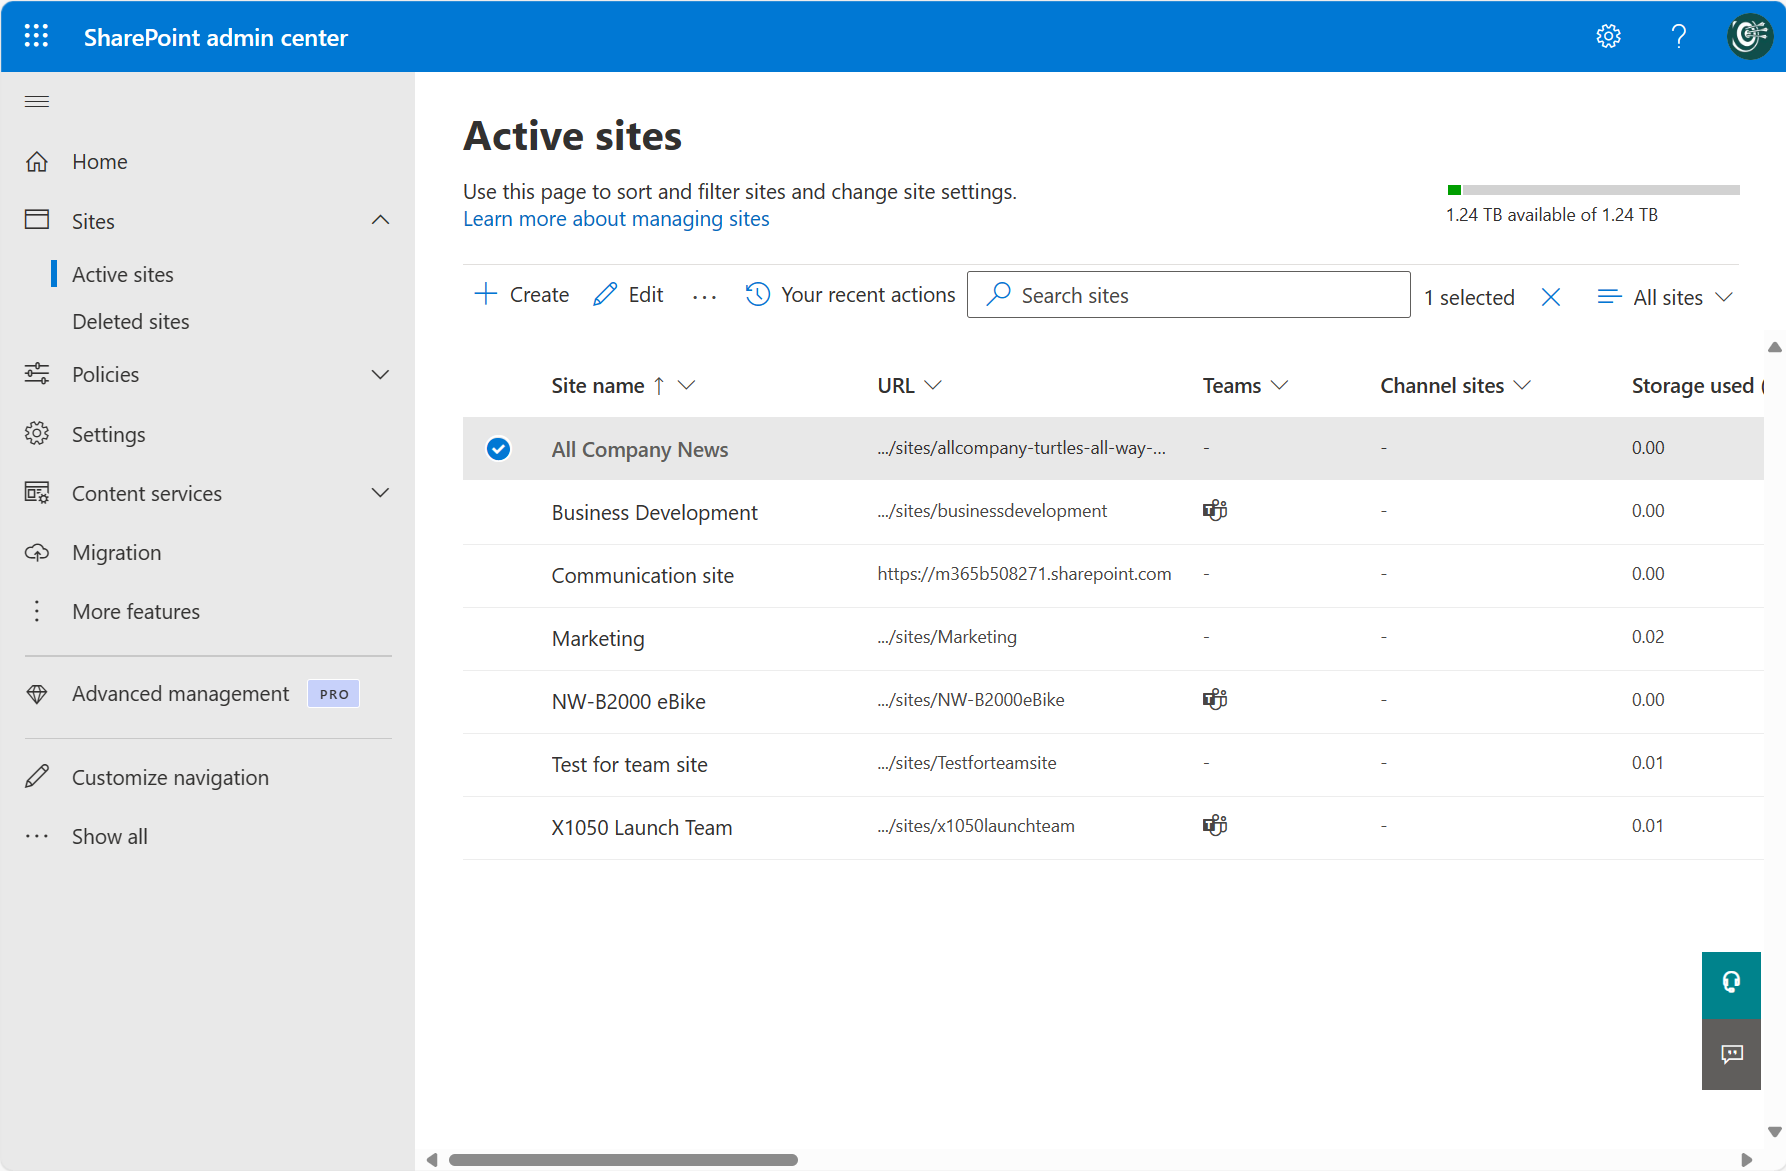 Manage sites in the SharePoint admin center - SharePoint in